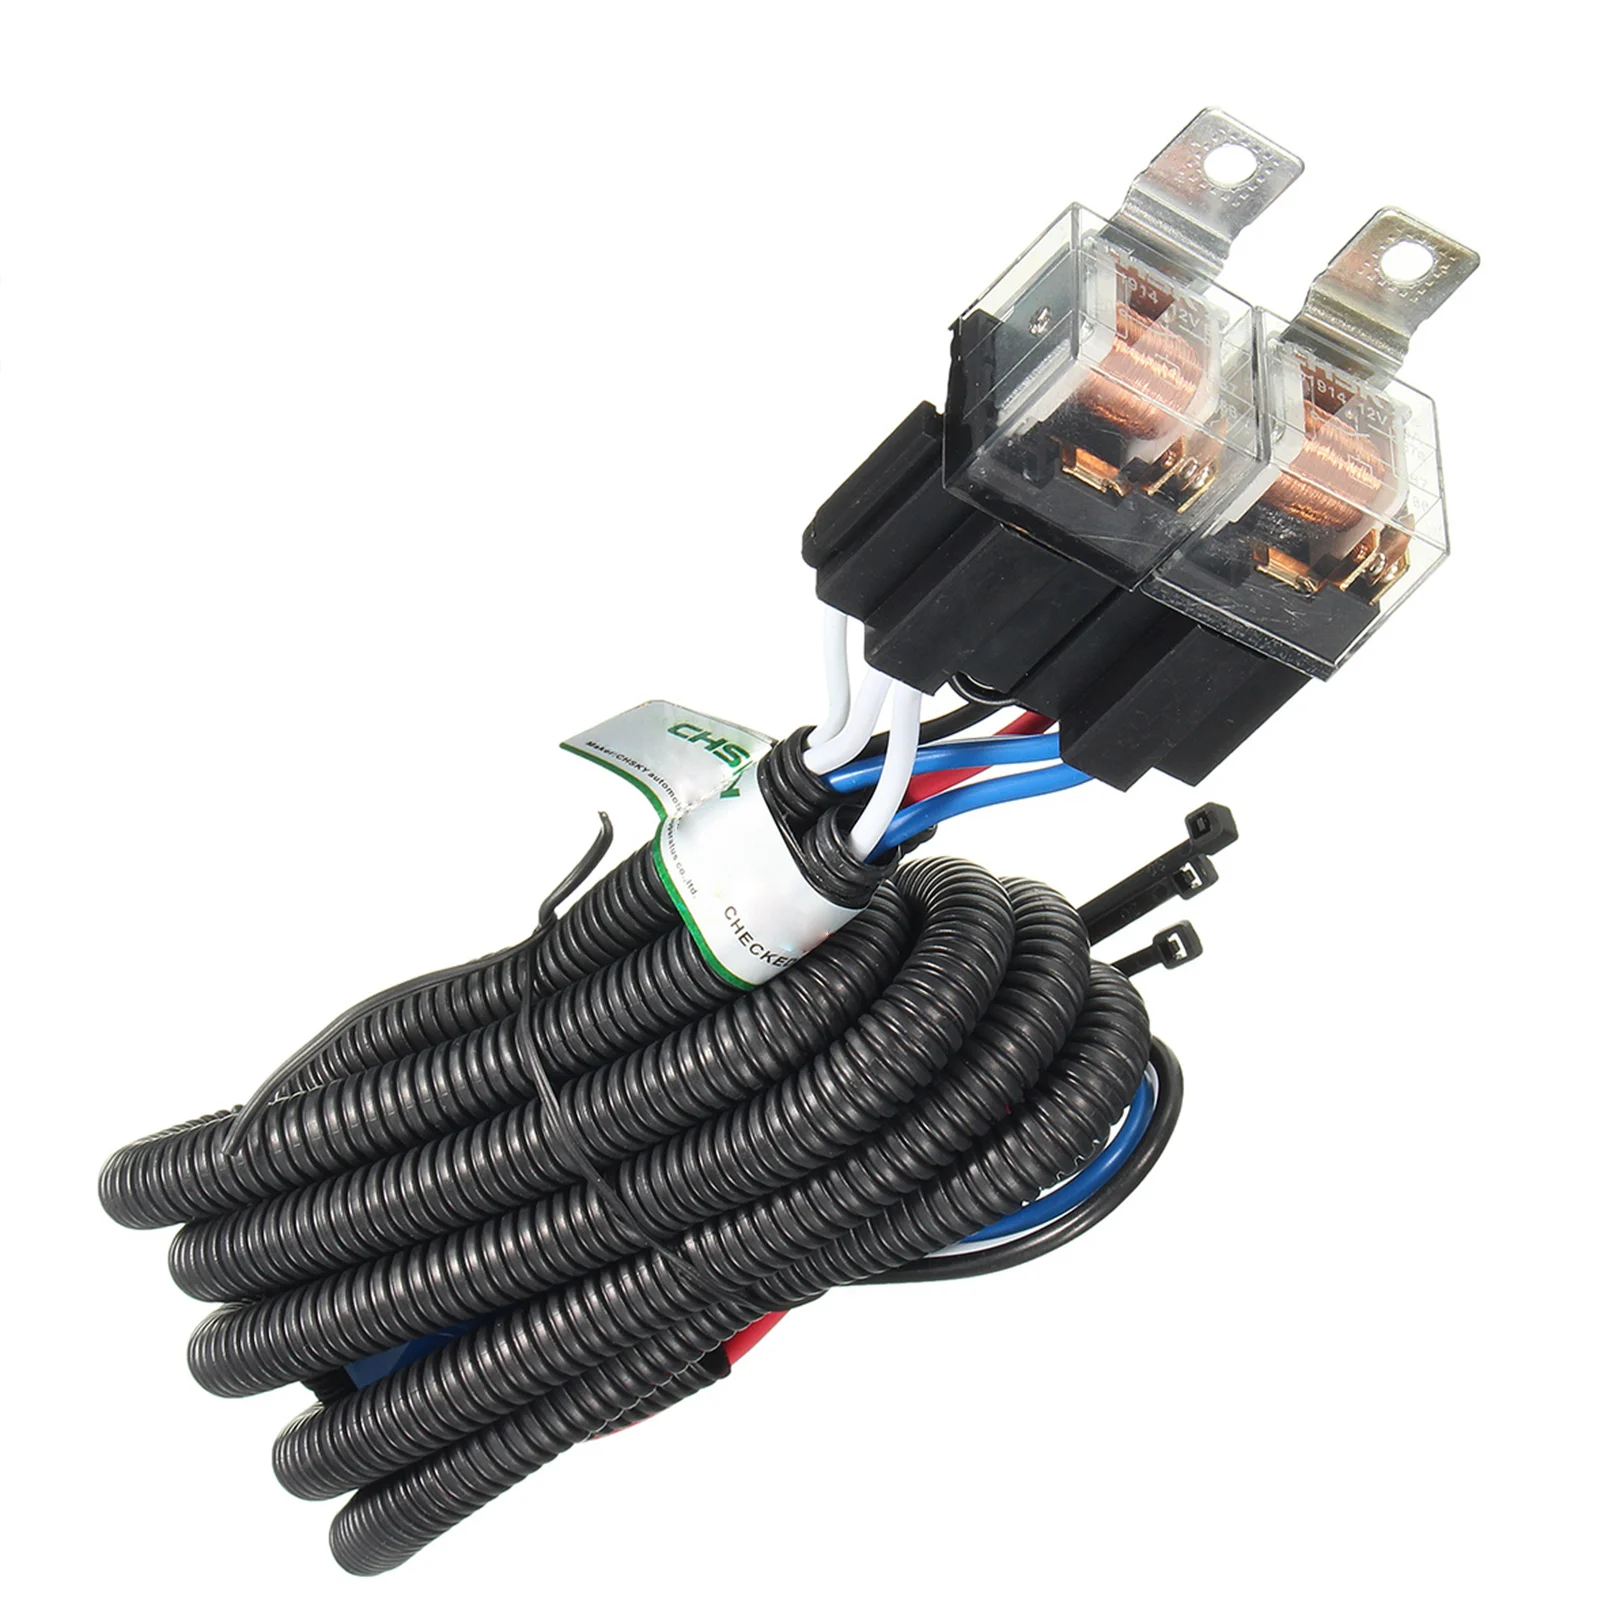 

H4 LED Headlight Enhancer Bulb Relay Wiring Harness Plug Kit Relay Wiring Harness Kit Automobile Replacement Accessories